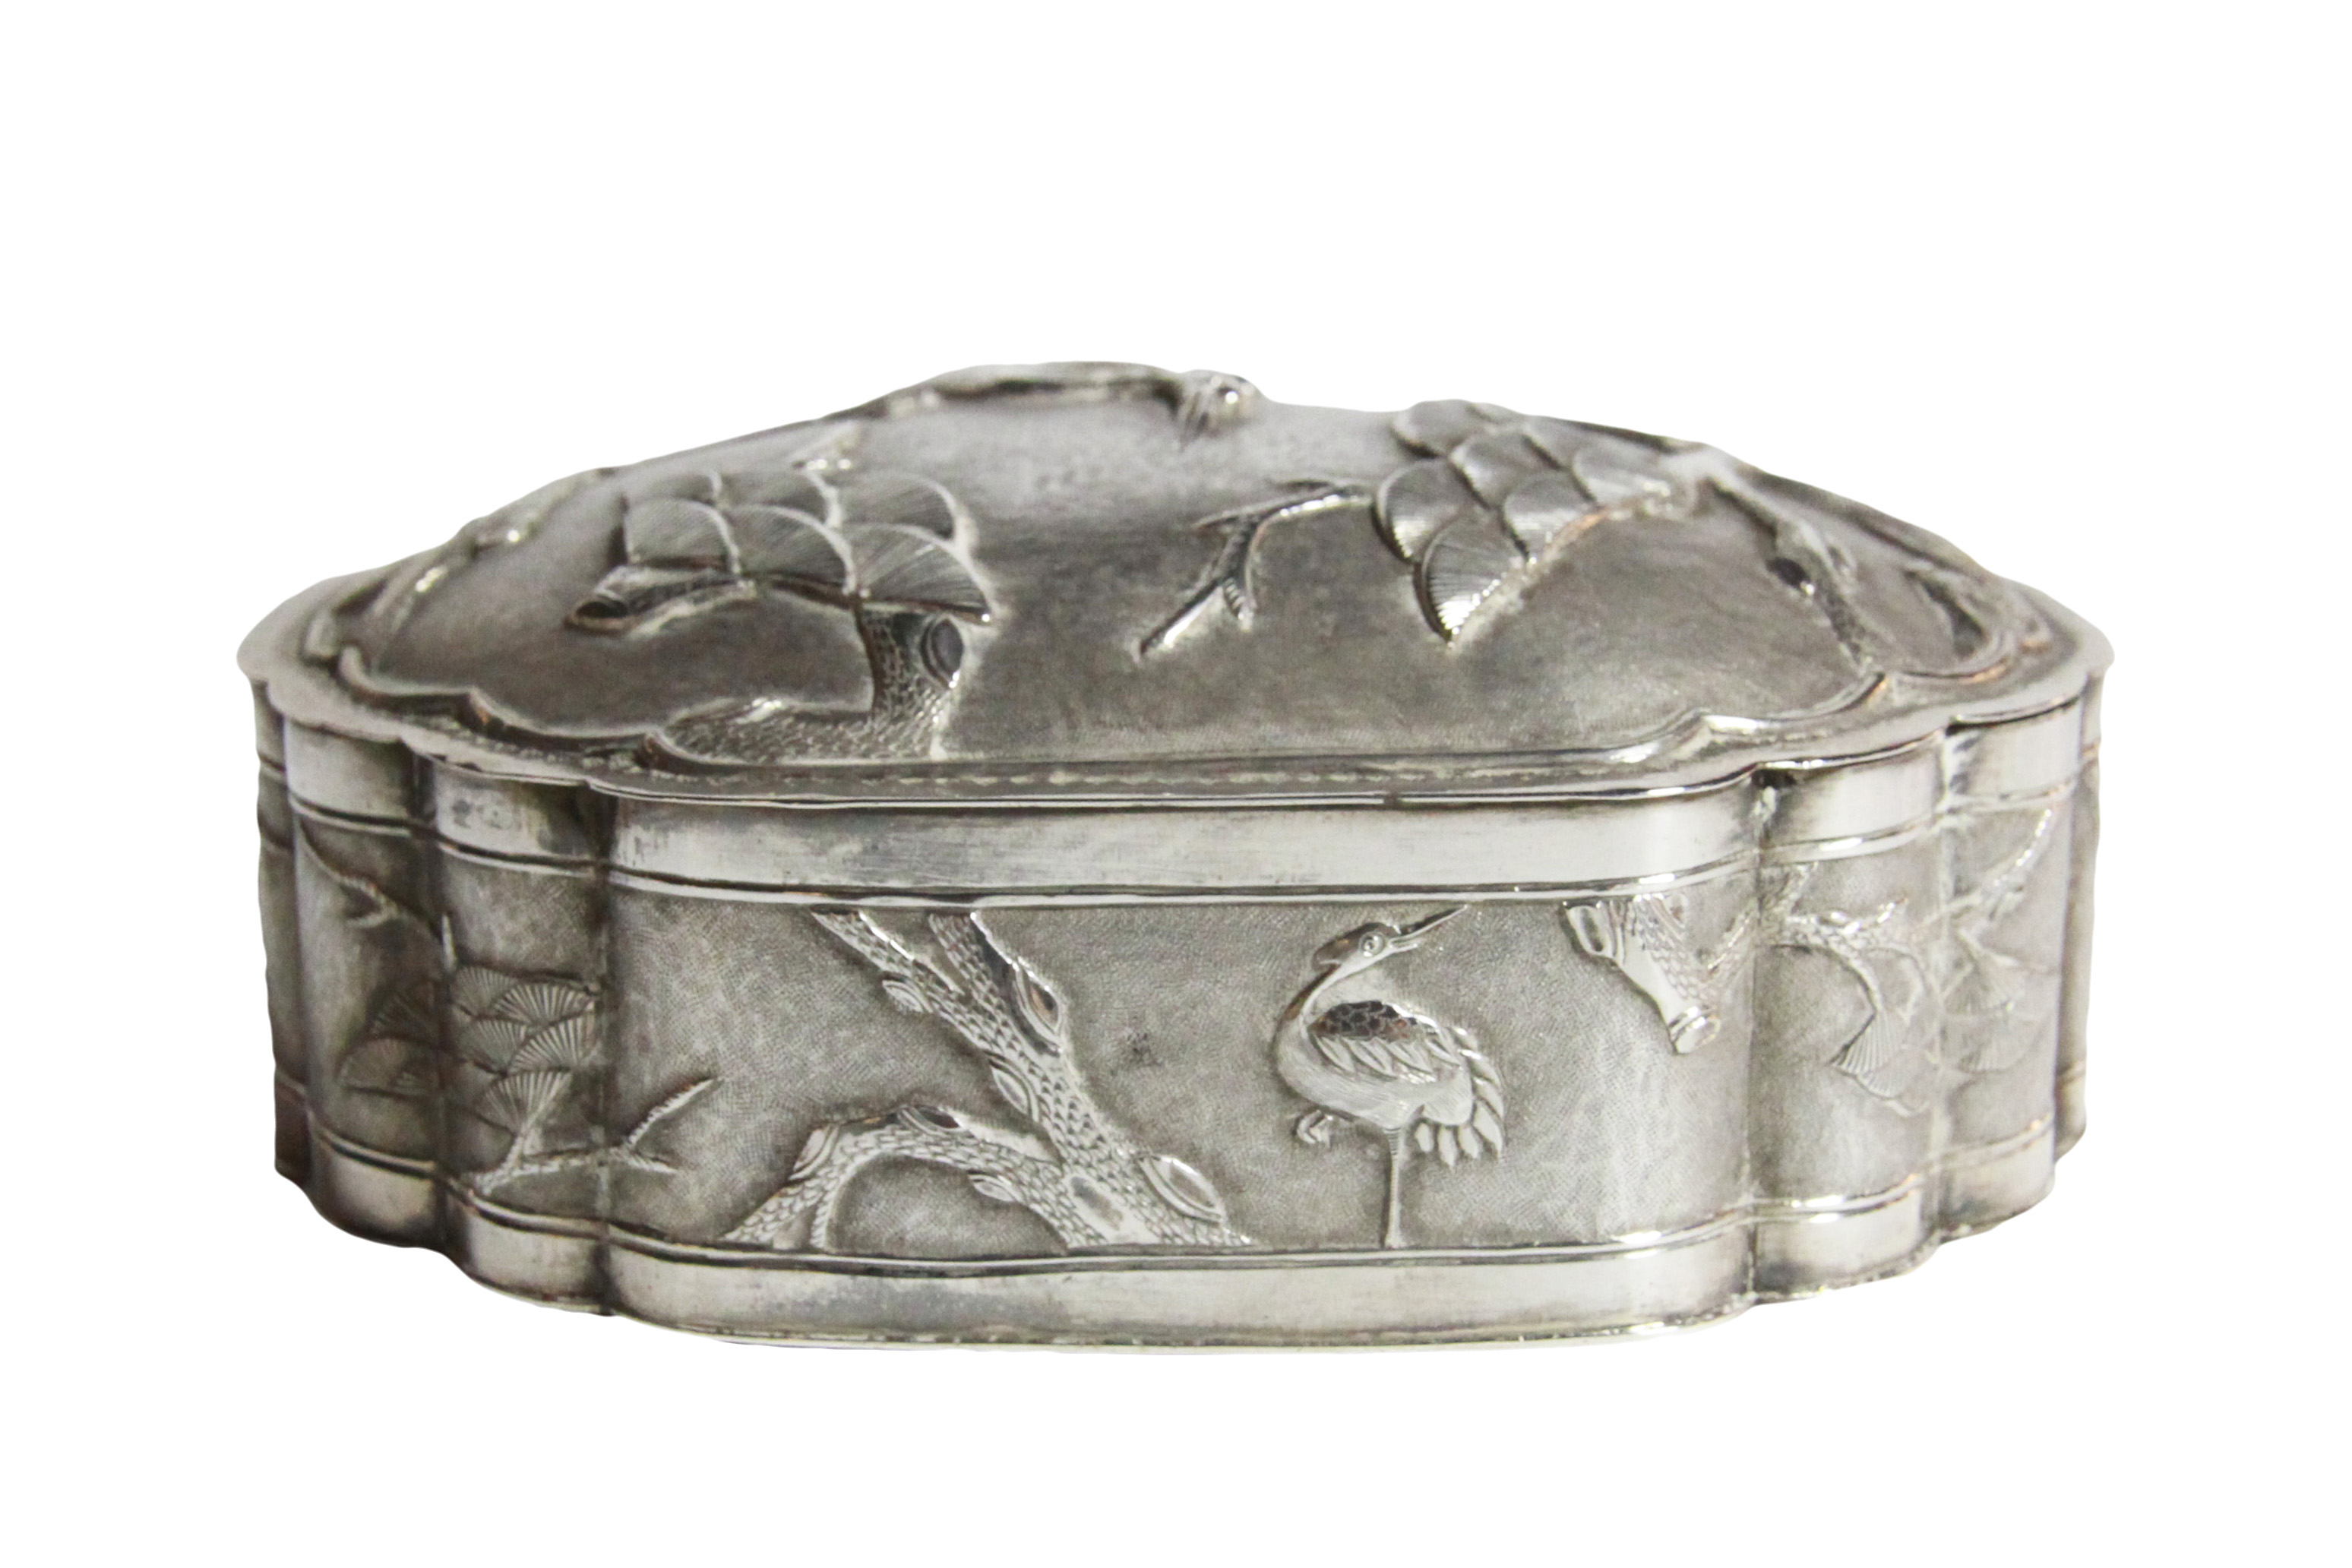 A good silver Chinese trinket box with stork decoration amongst foliage, (L: 14cm, 10.5 oz) - Image 3 of 5